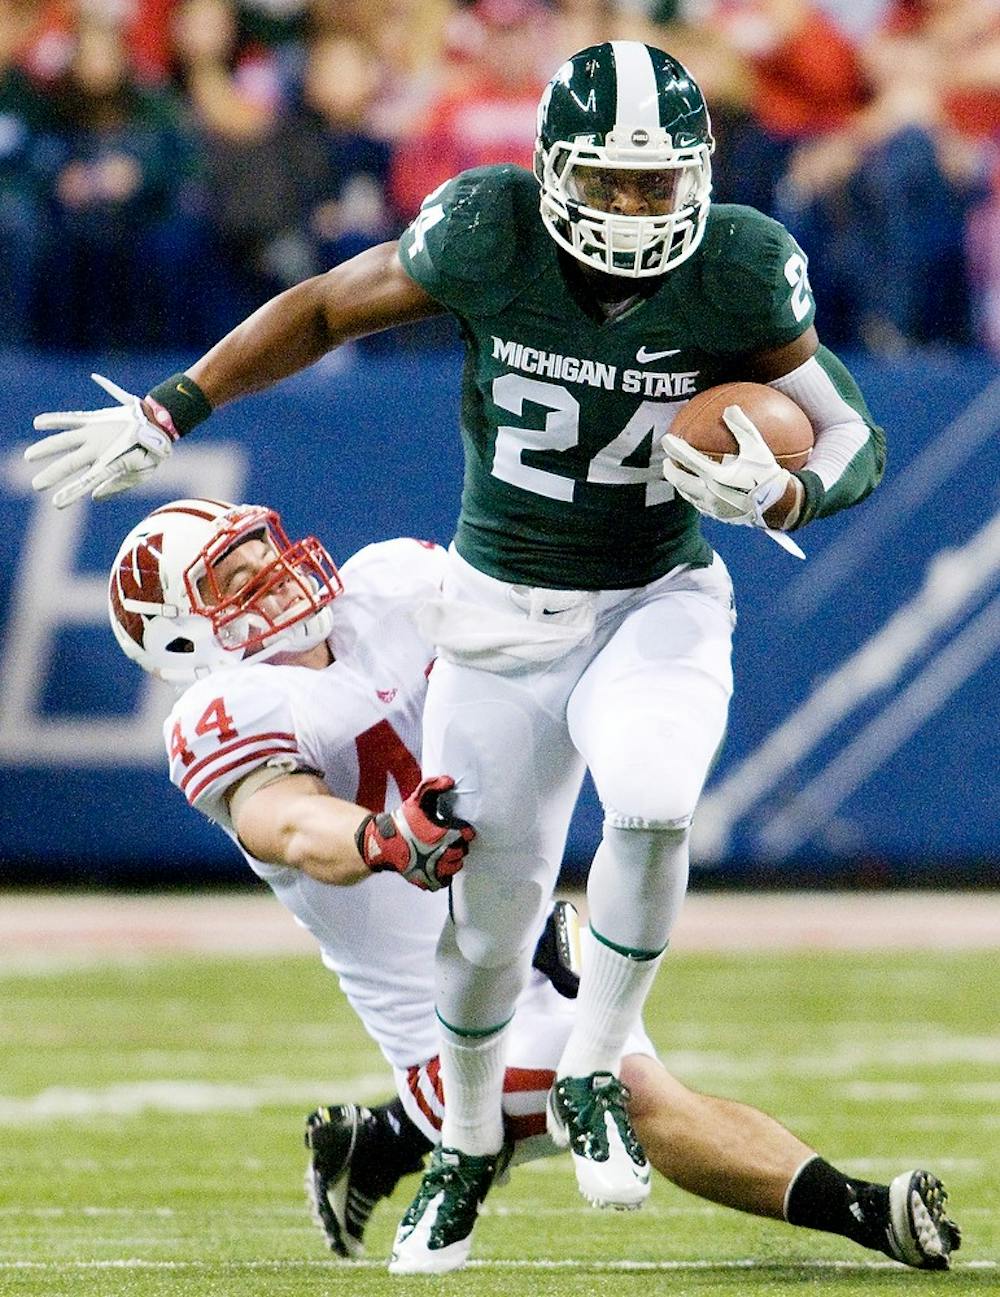 Then-sophomore running back Le'Veon Bell dashes forward as he breaks a tackle by Wisconsin linebacker Chris Borland. The Wisconsin Badgers defeated the Spartans, 42-39, on Dec. 13, 2011 at Lucas Oil Stadium in Indianapolis. State News File Photo